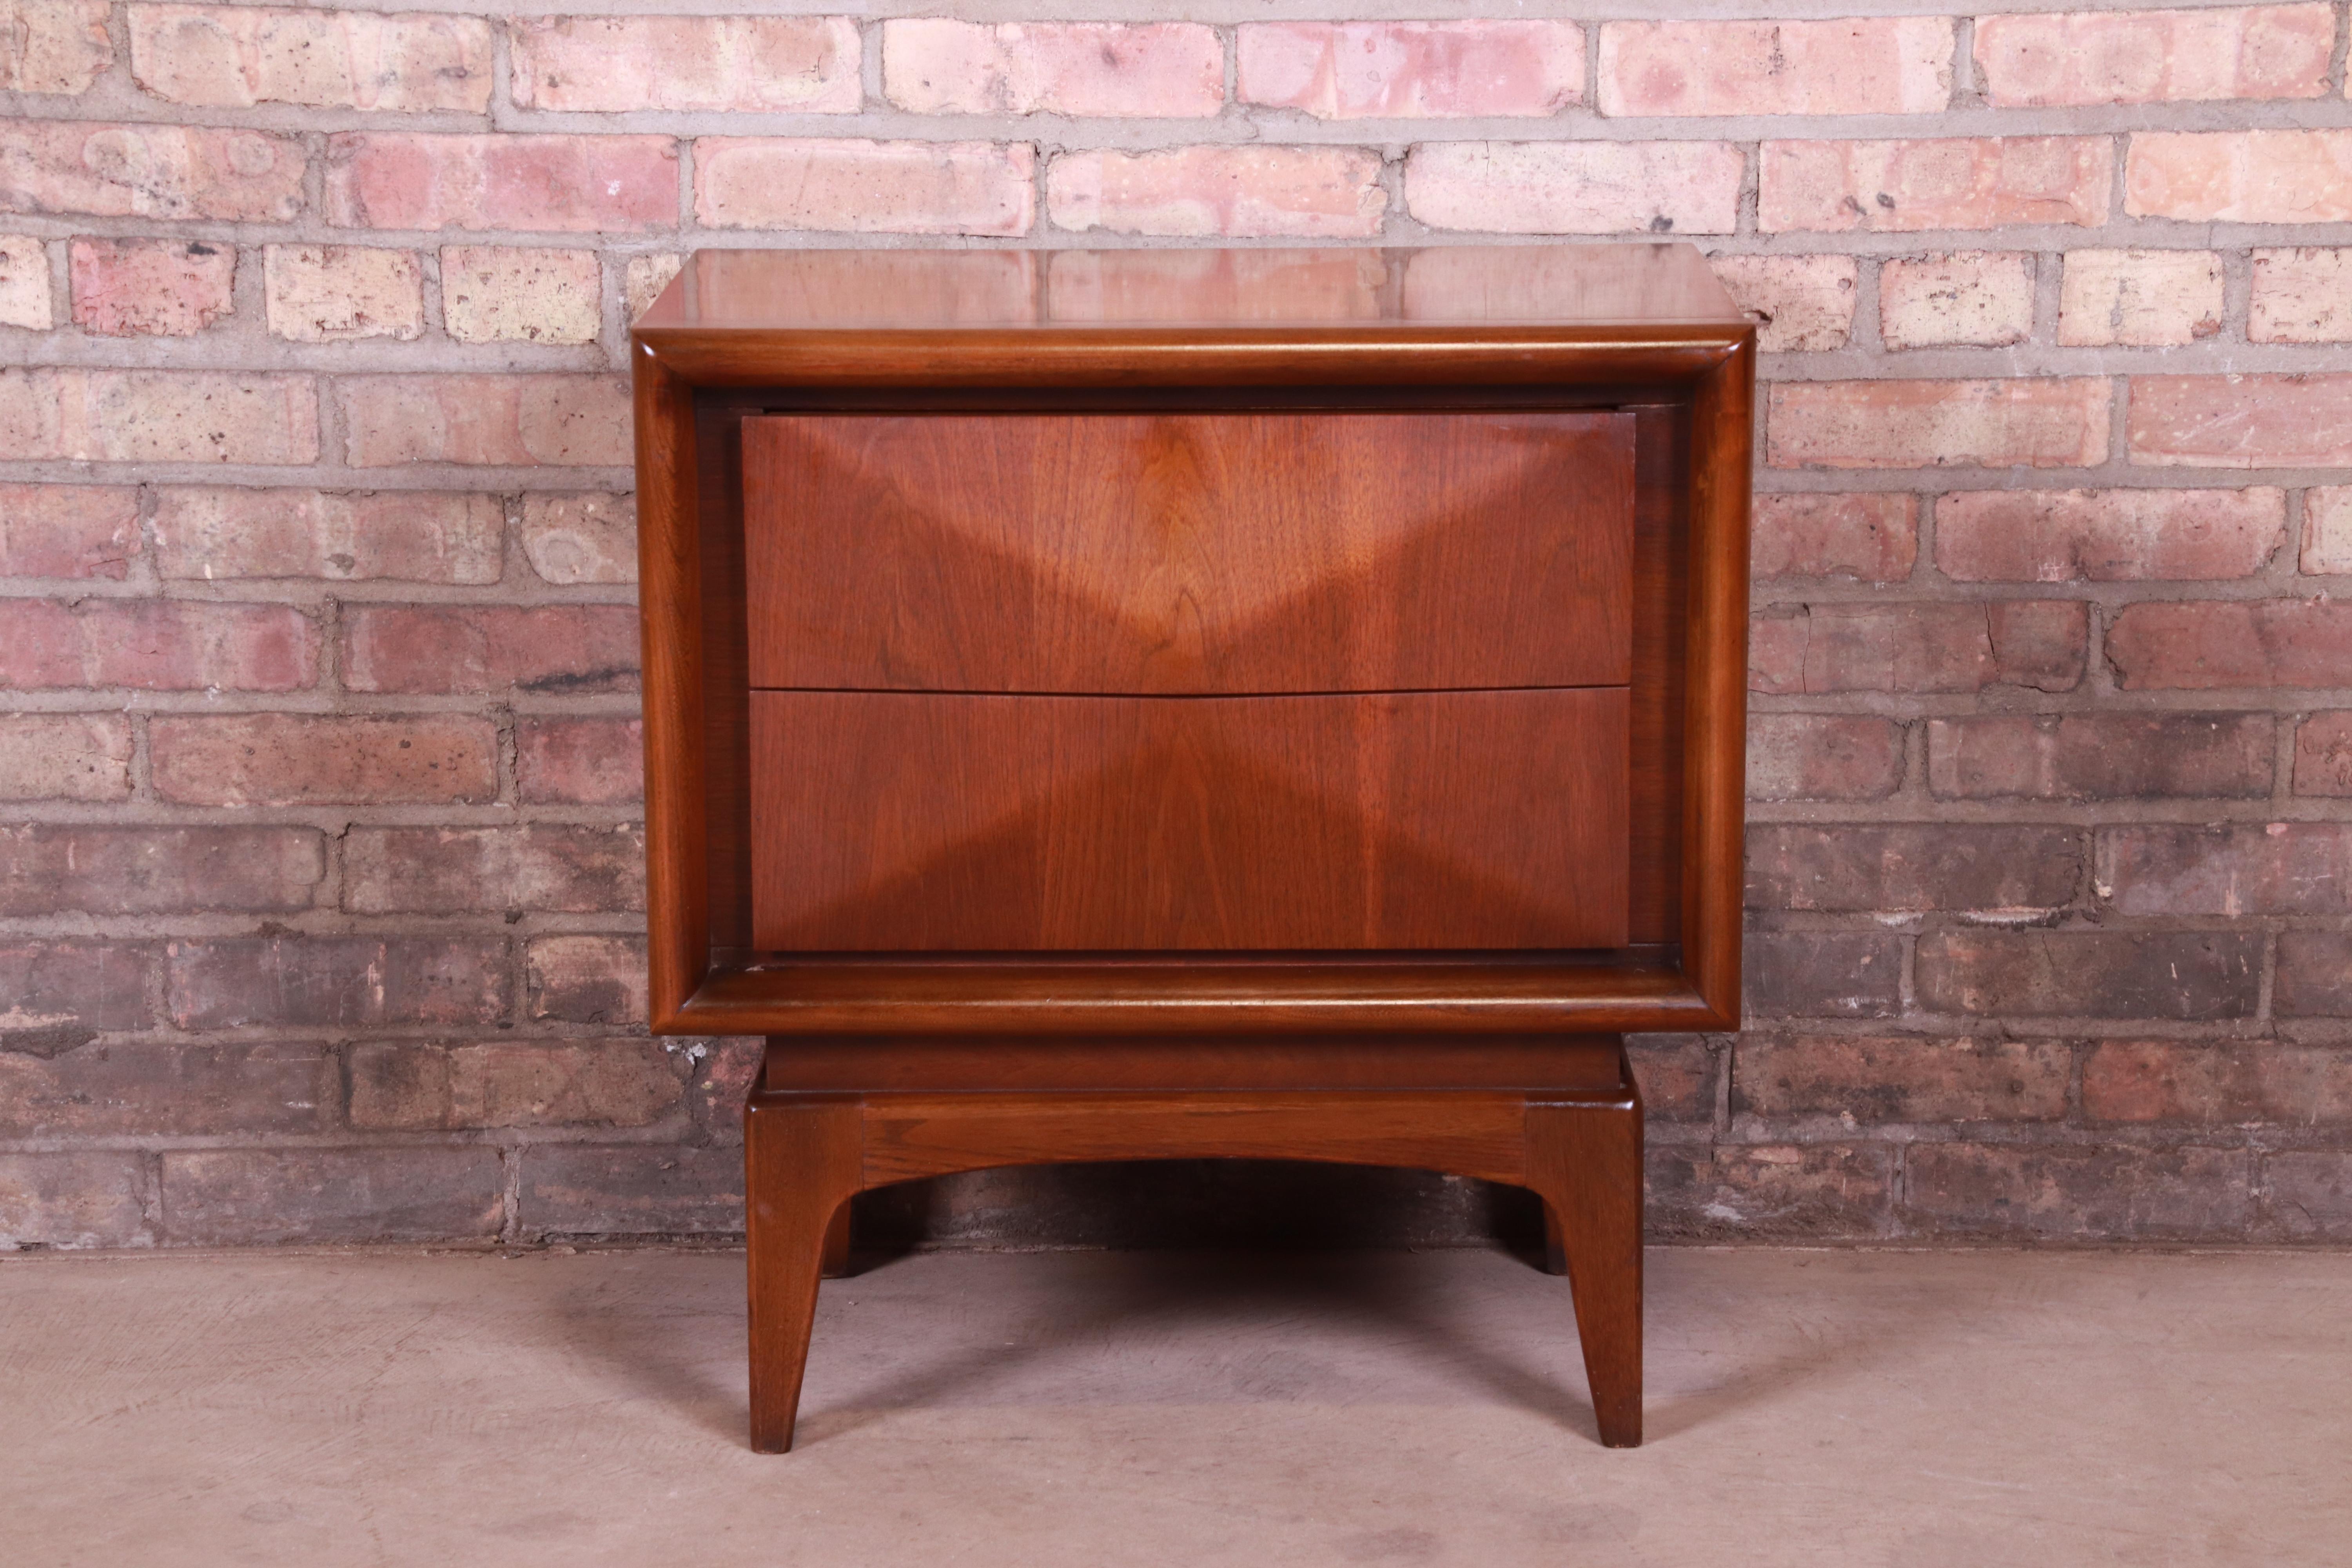 American Mid-Century Modern Sculpted Walnut Diamond Front Nightstand by United, 1960s